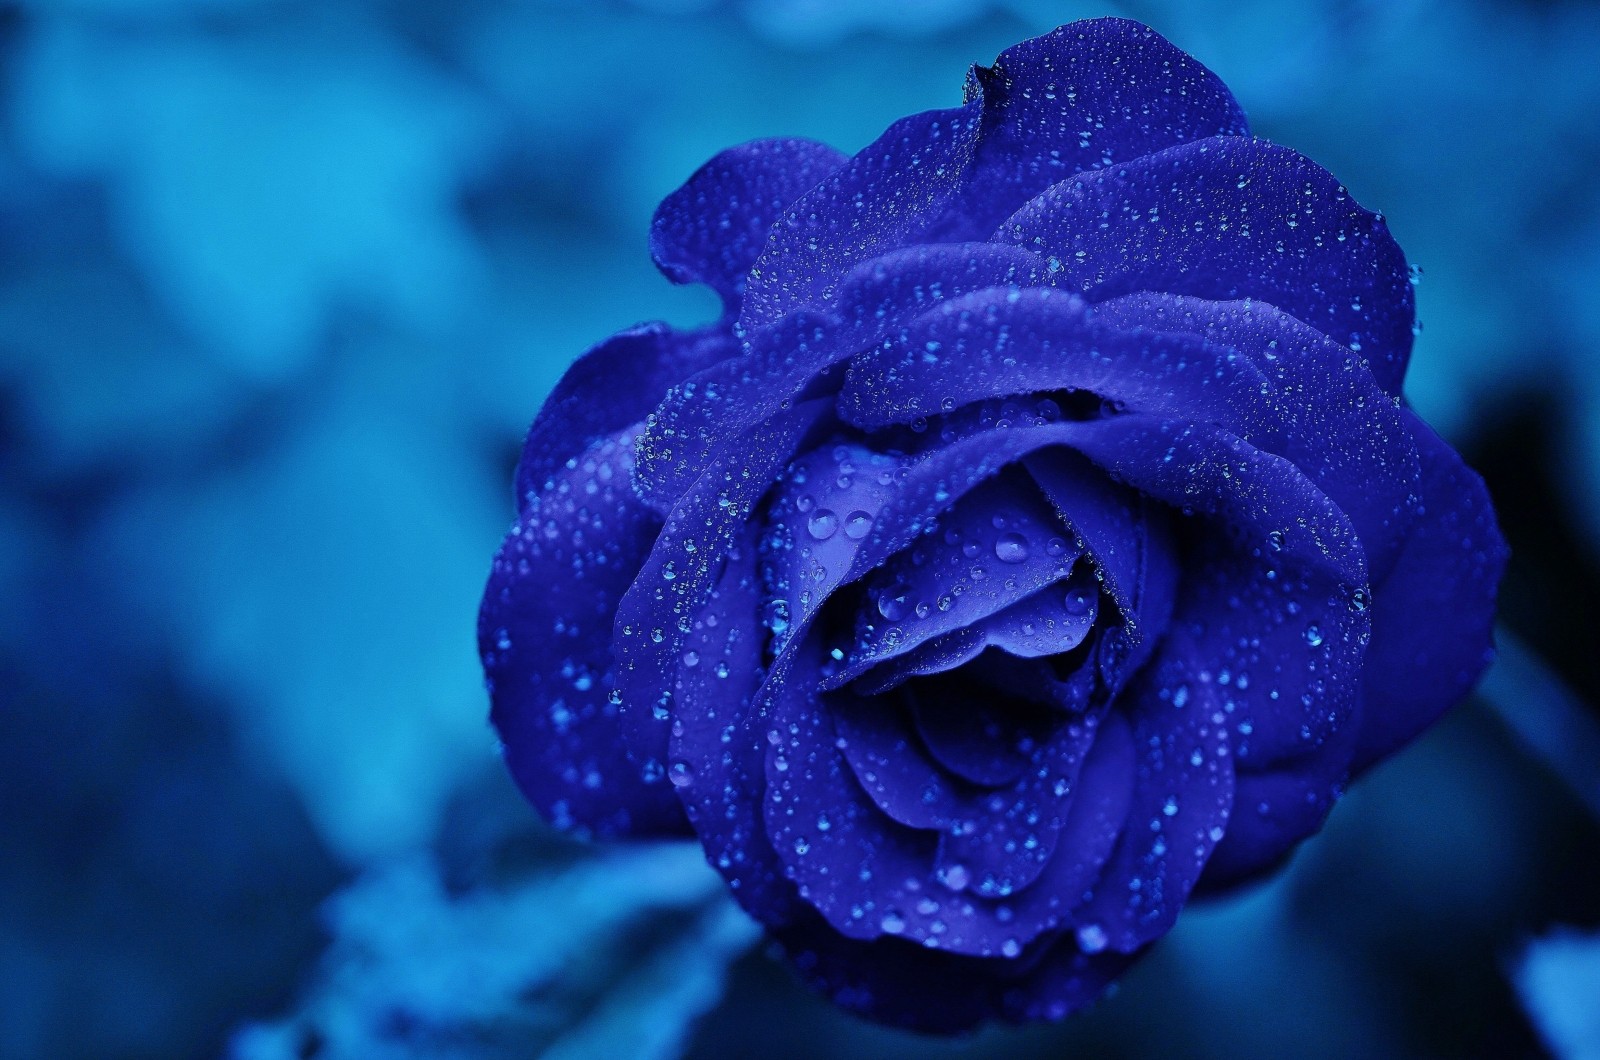 2-close-up-of-blue-rose-with-dew